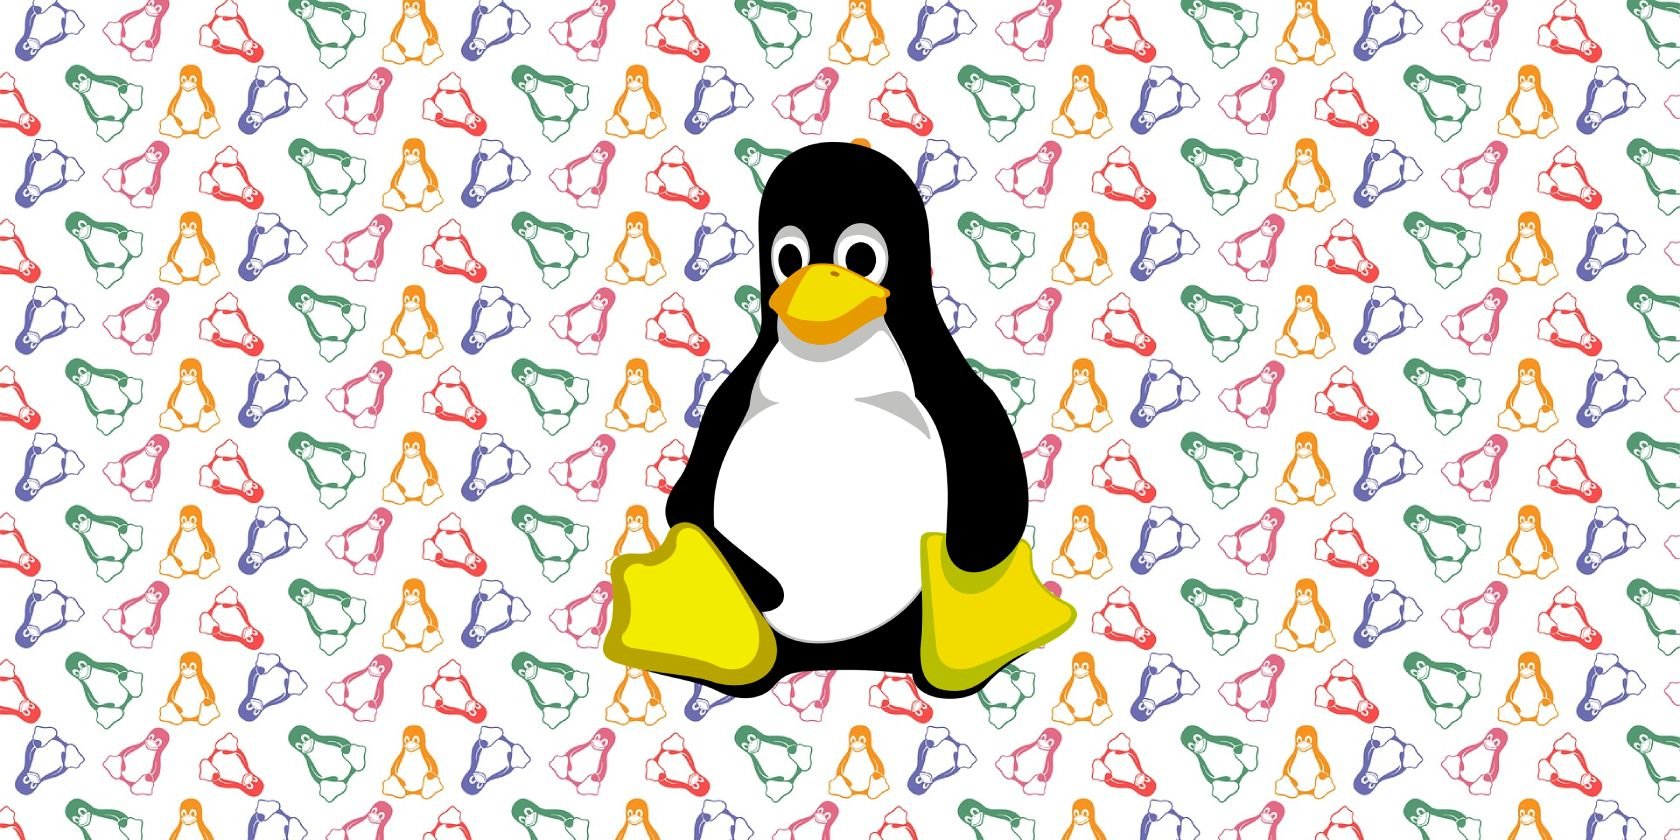 What’s New in Linux Kernel 5.14: 8 Major Improvements